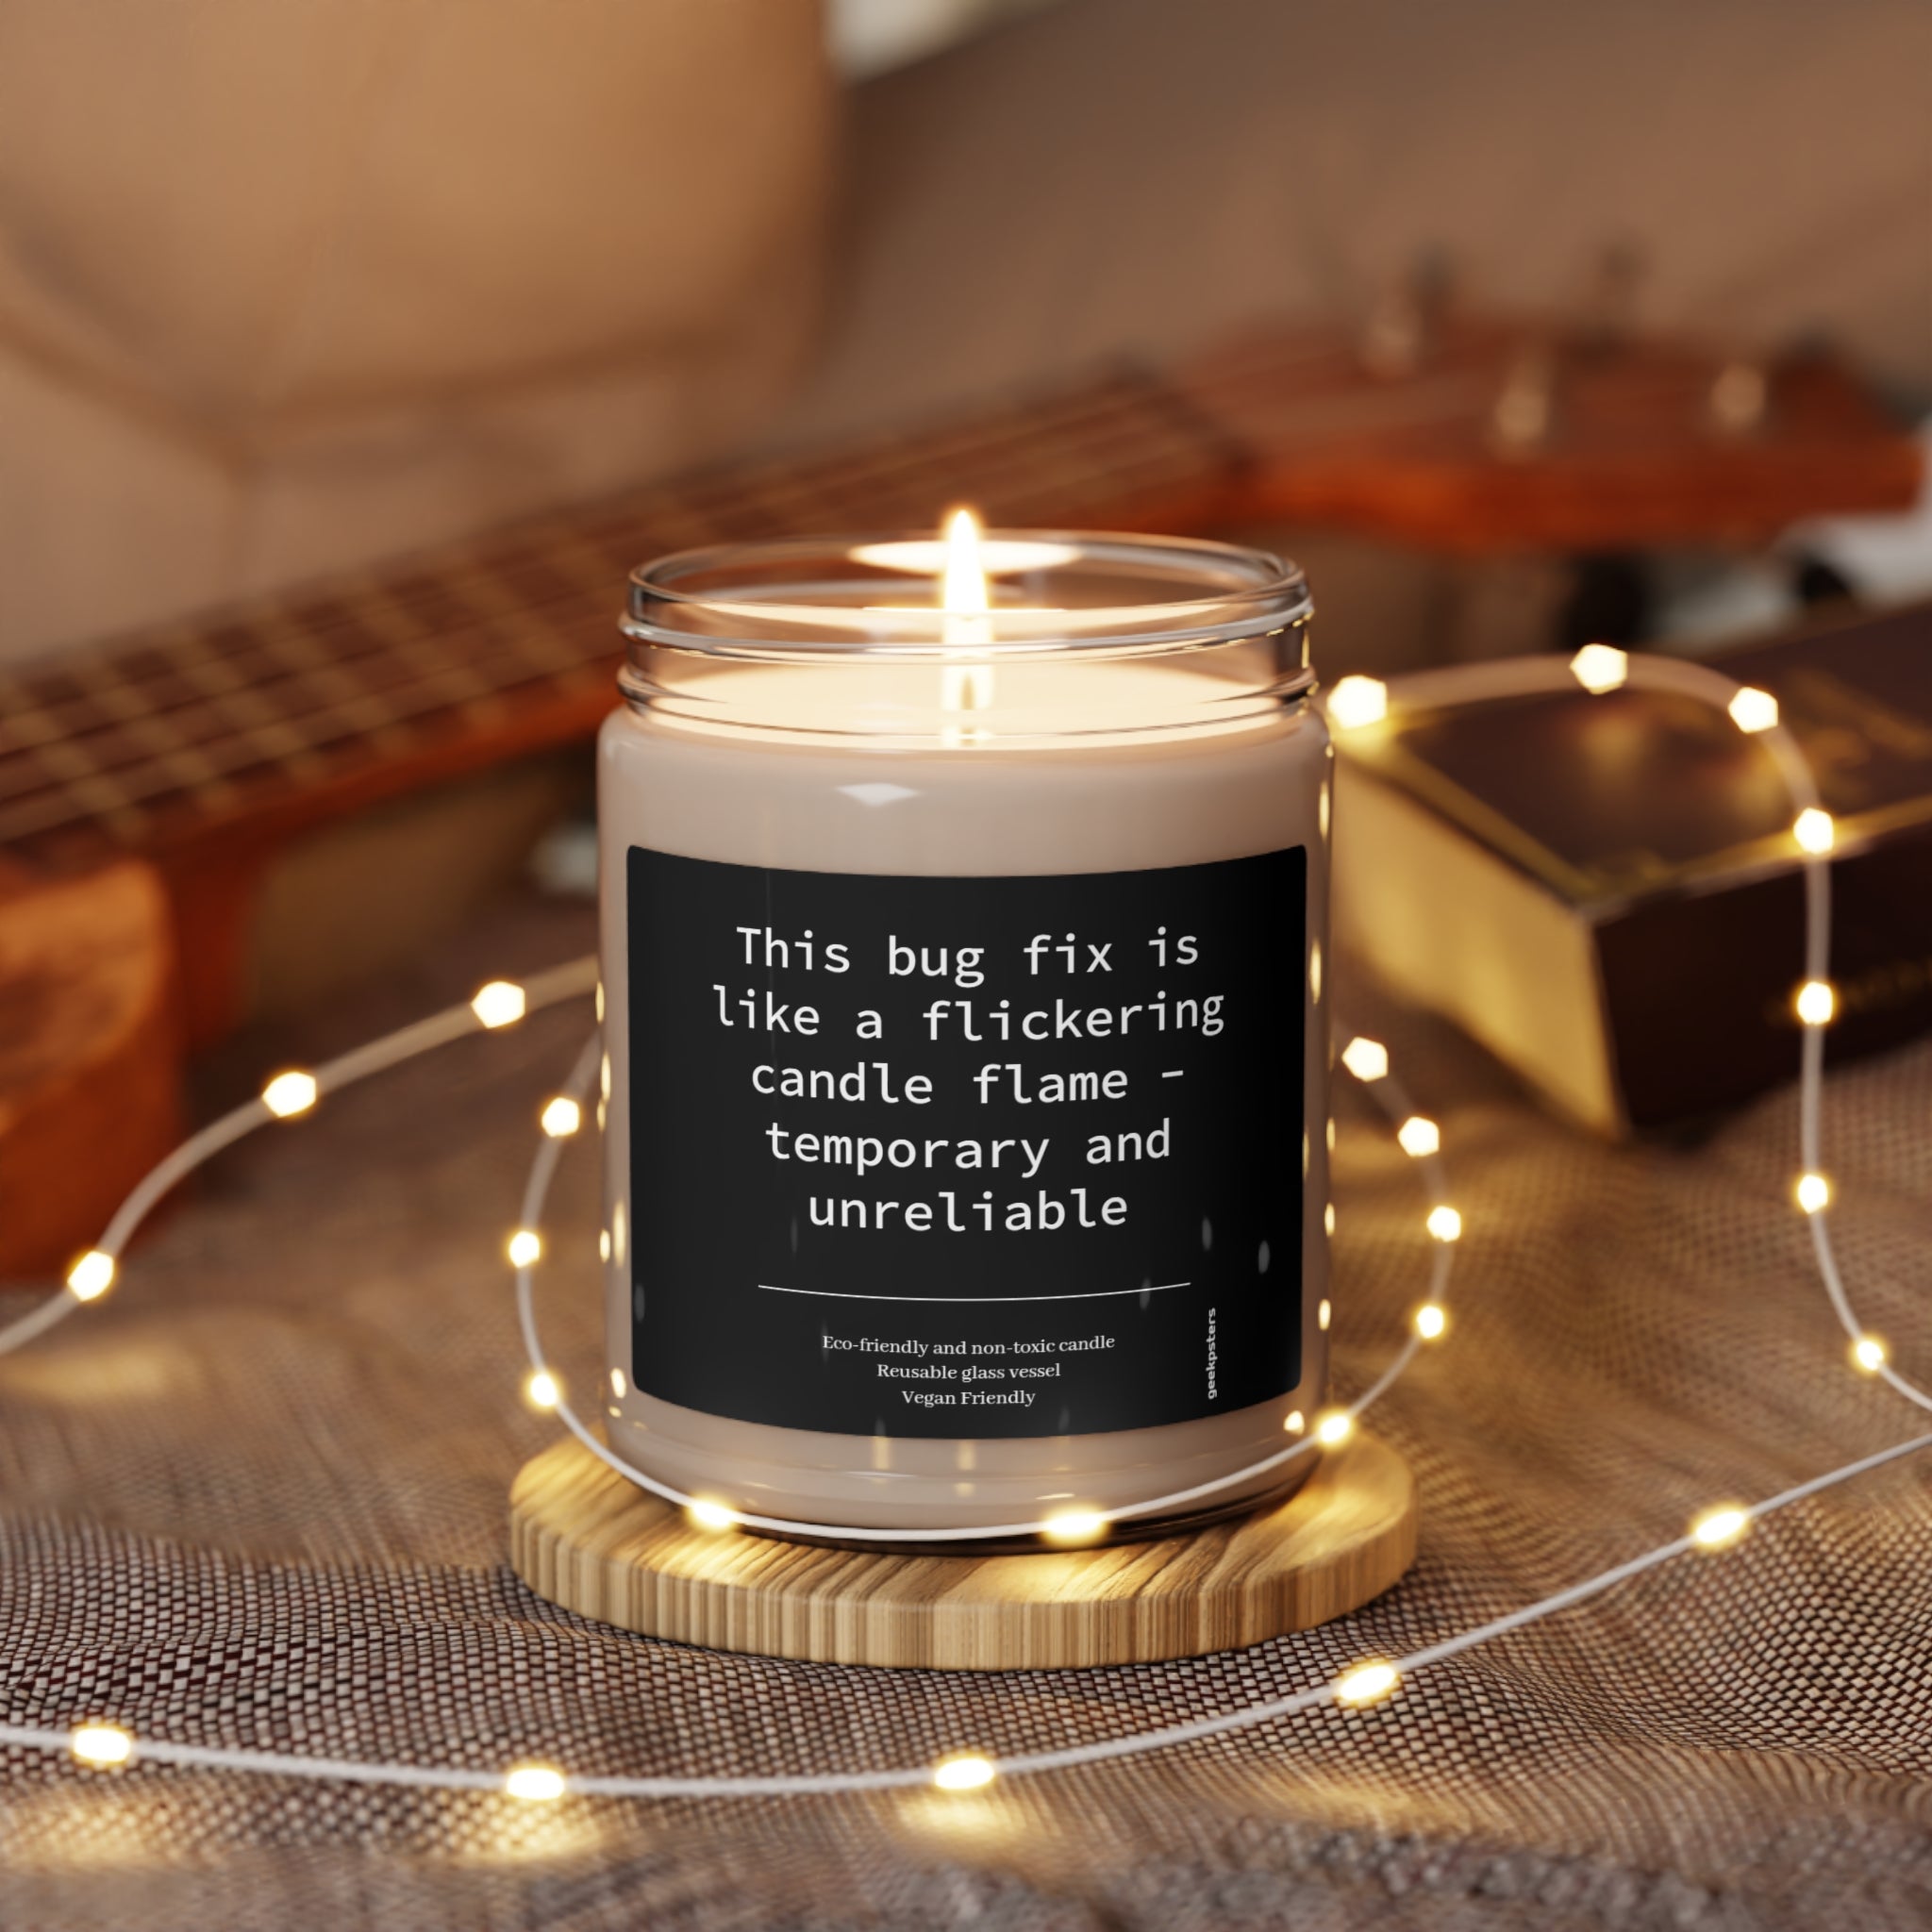 A scented This Bug Fix is Like a Flame - Scented Soy Candle, 9oz made from a natural soy wax blend with a humorous message about bug fixes on its label, set against a cozy backdrop with warm lights.